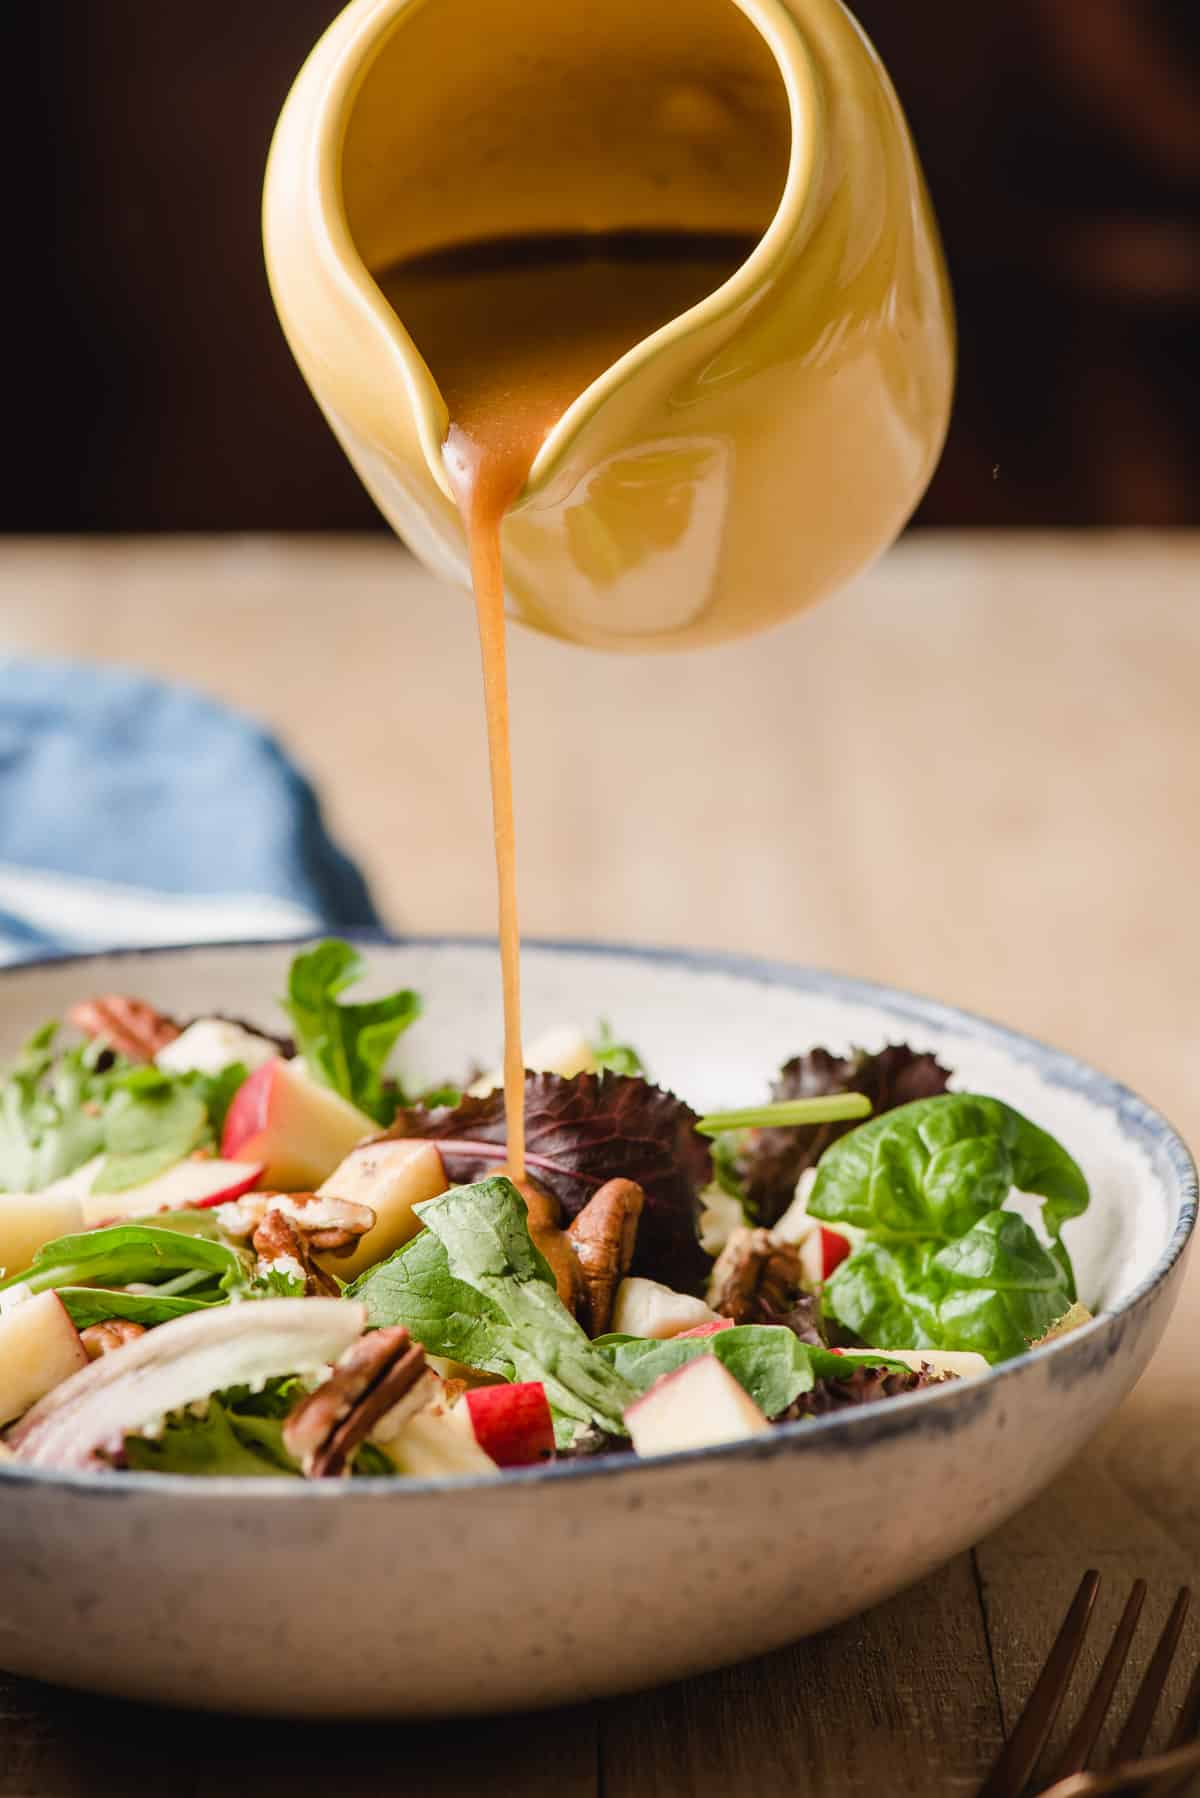 Maple dressing being drizzled on a salad with apples and feta.